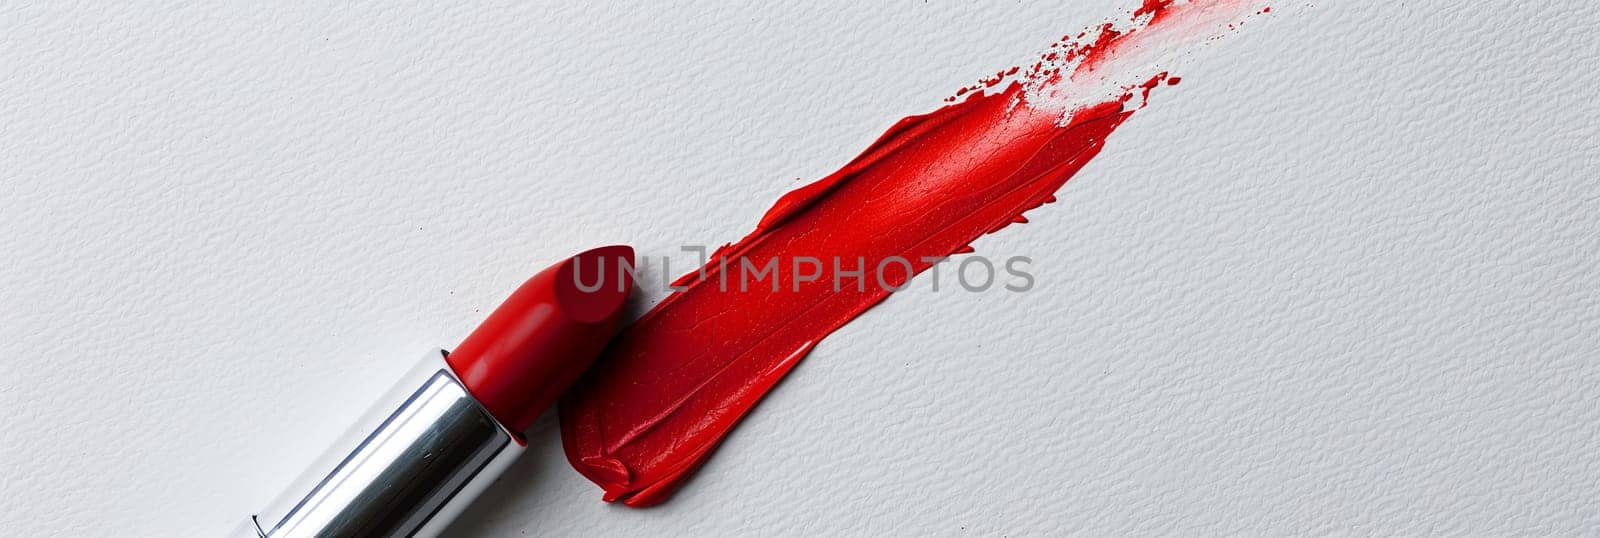 Red lipstick leaves a striking swatch on a white surface, showcasing its classic matte finish.